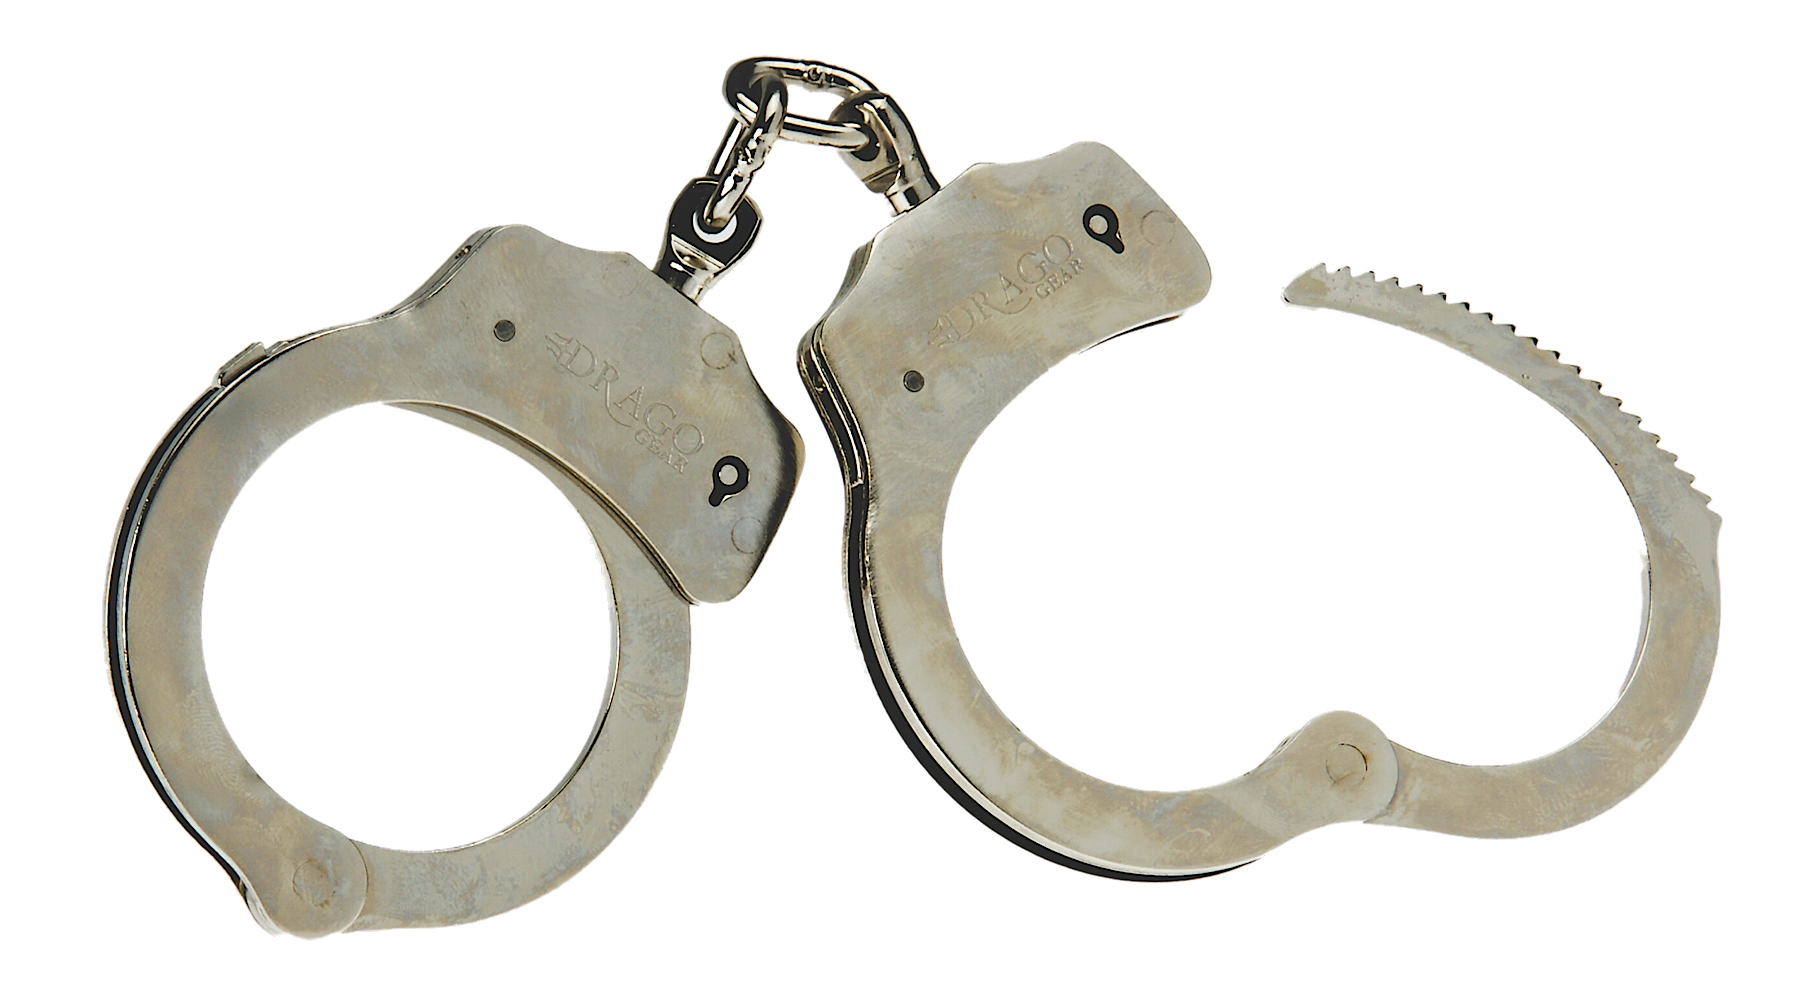 Opened handcuffs png image. Handcuff clipart handcuff key